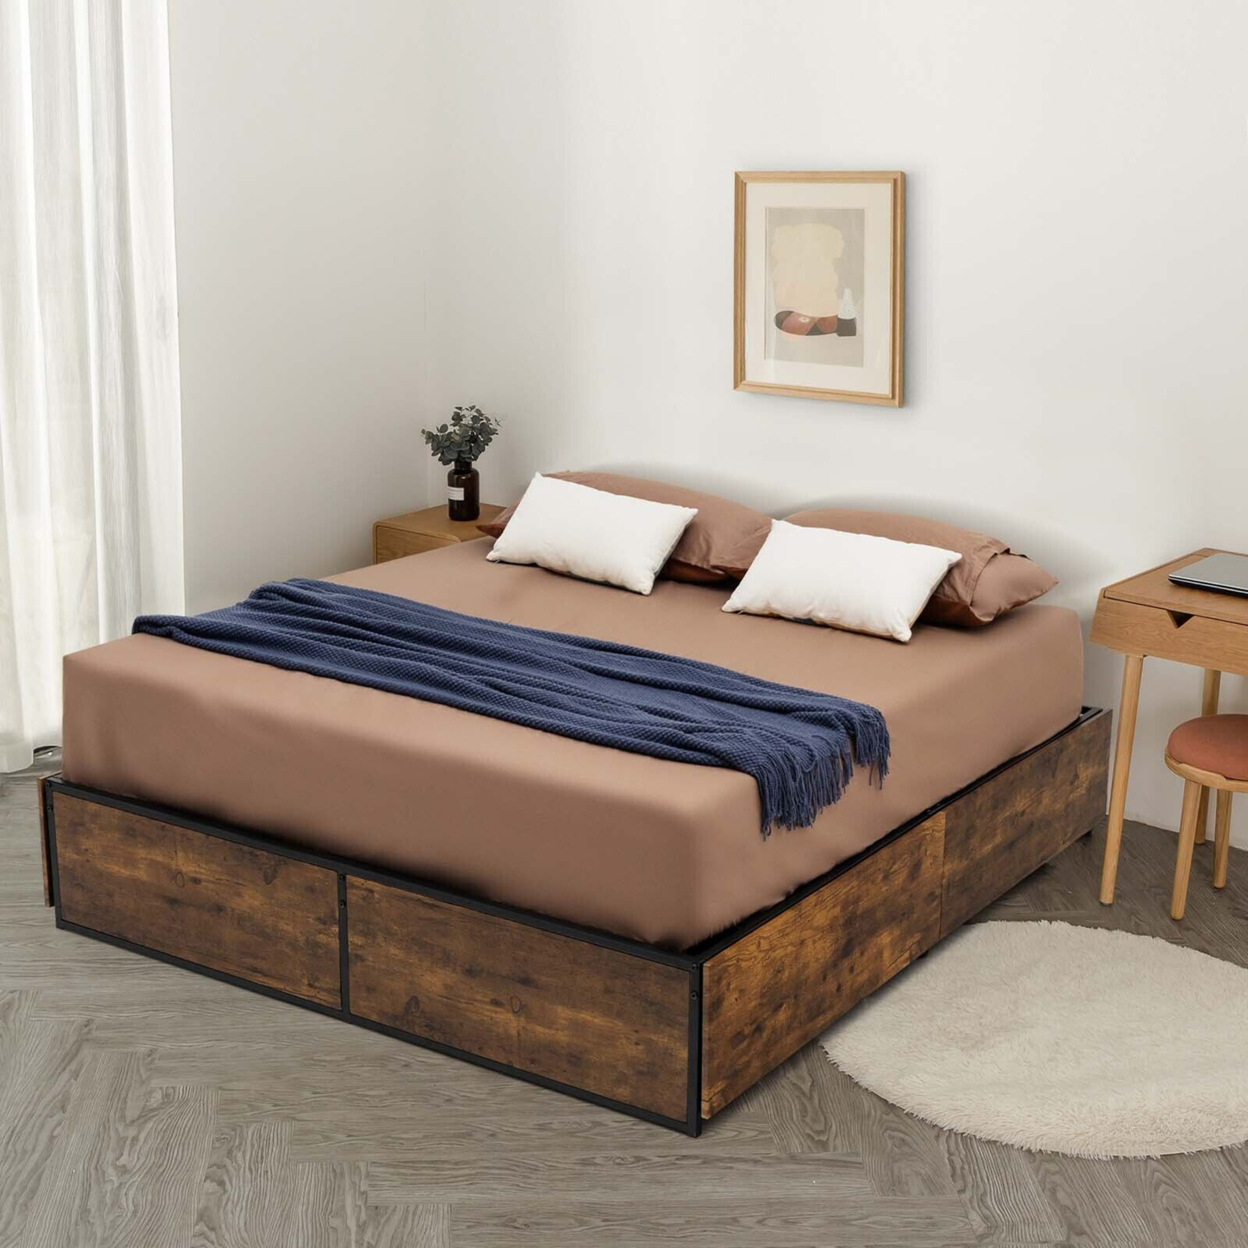 Full Industrial Metal Platform Bed Frame With 4 Drawers Wooden Footboard